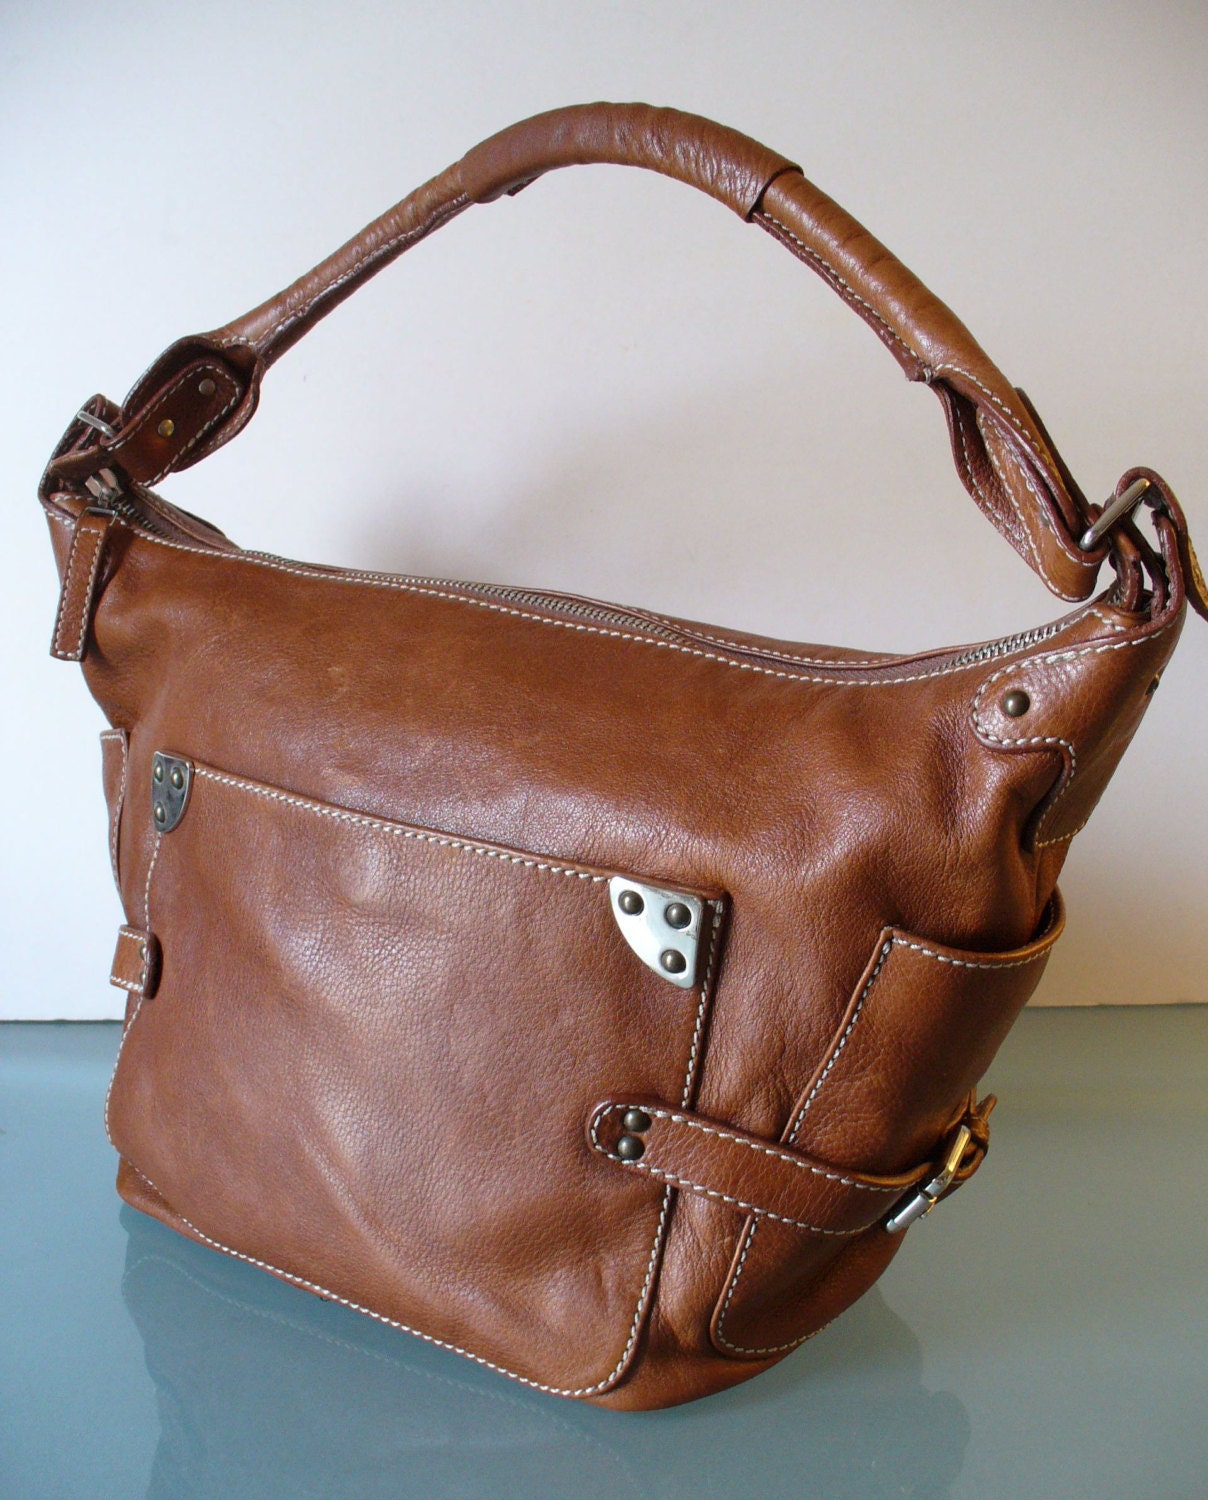 Nuovedive Made in Italy Hobo Style Leather Bag